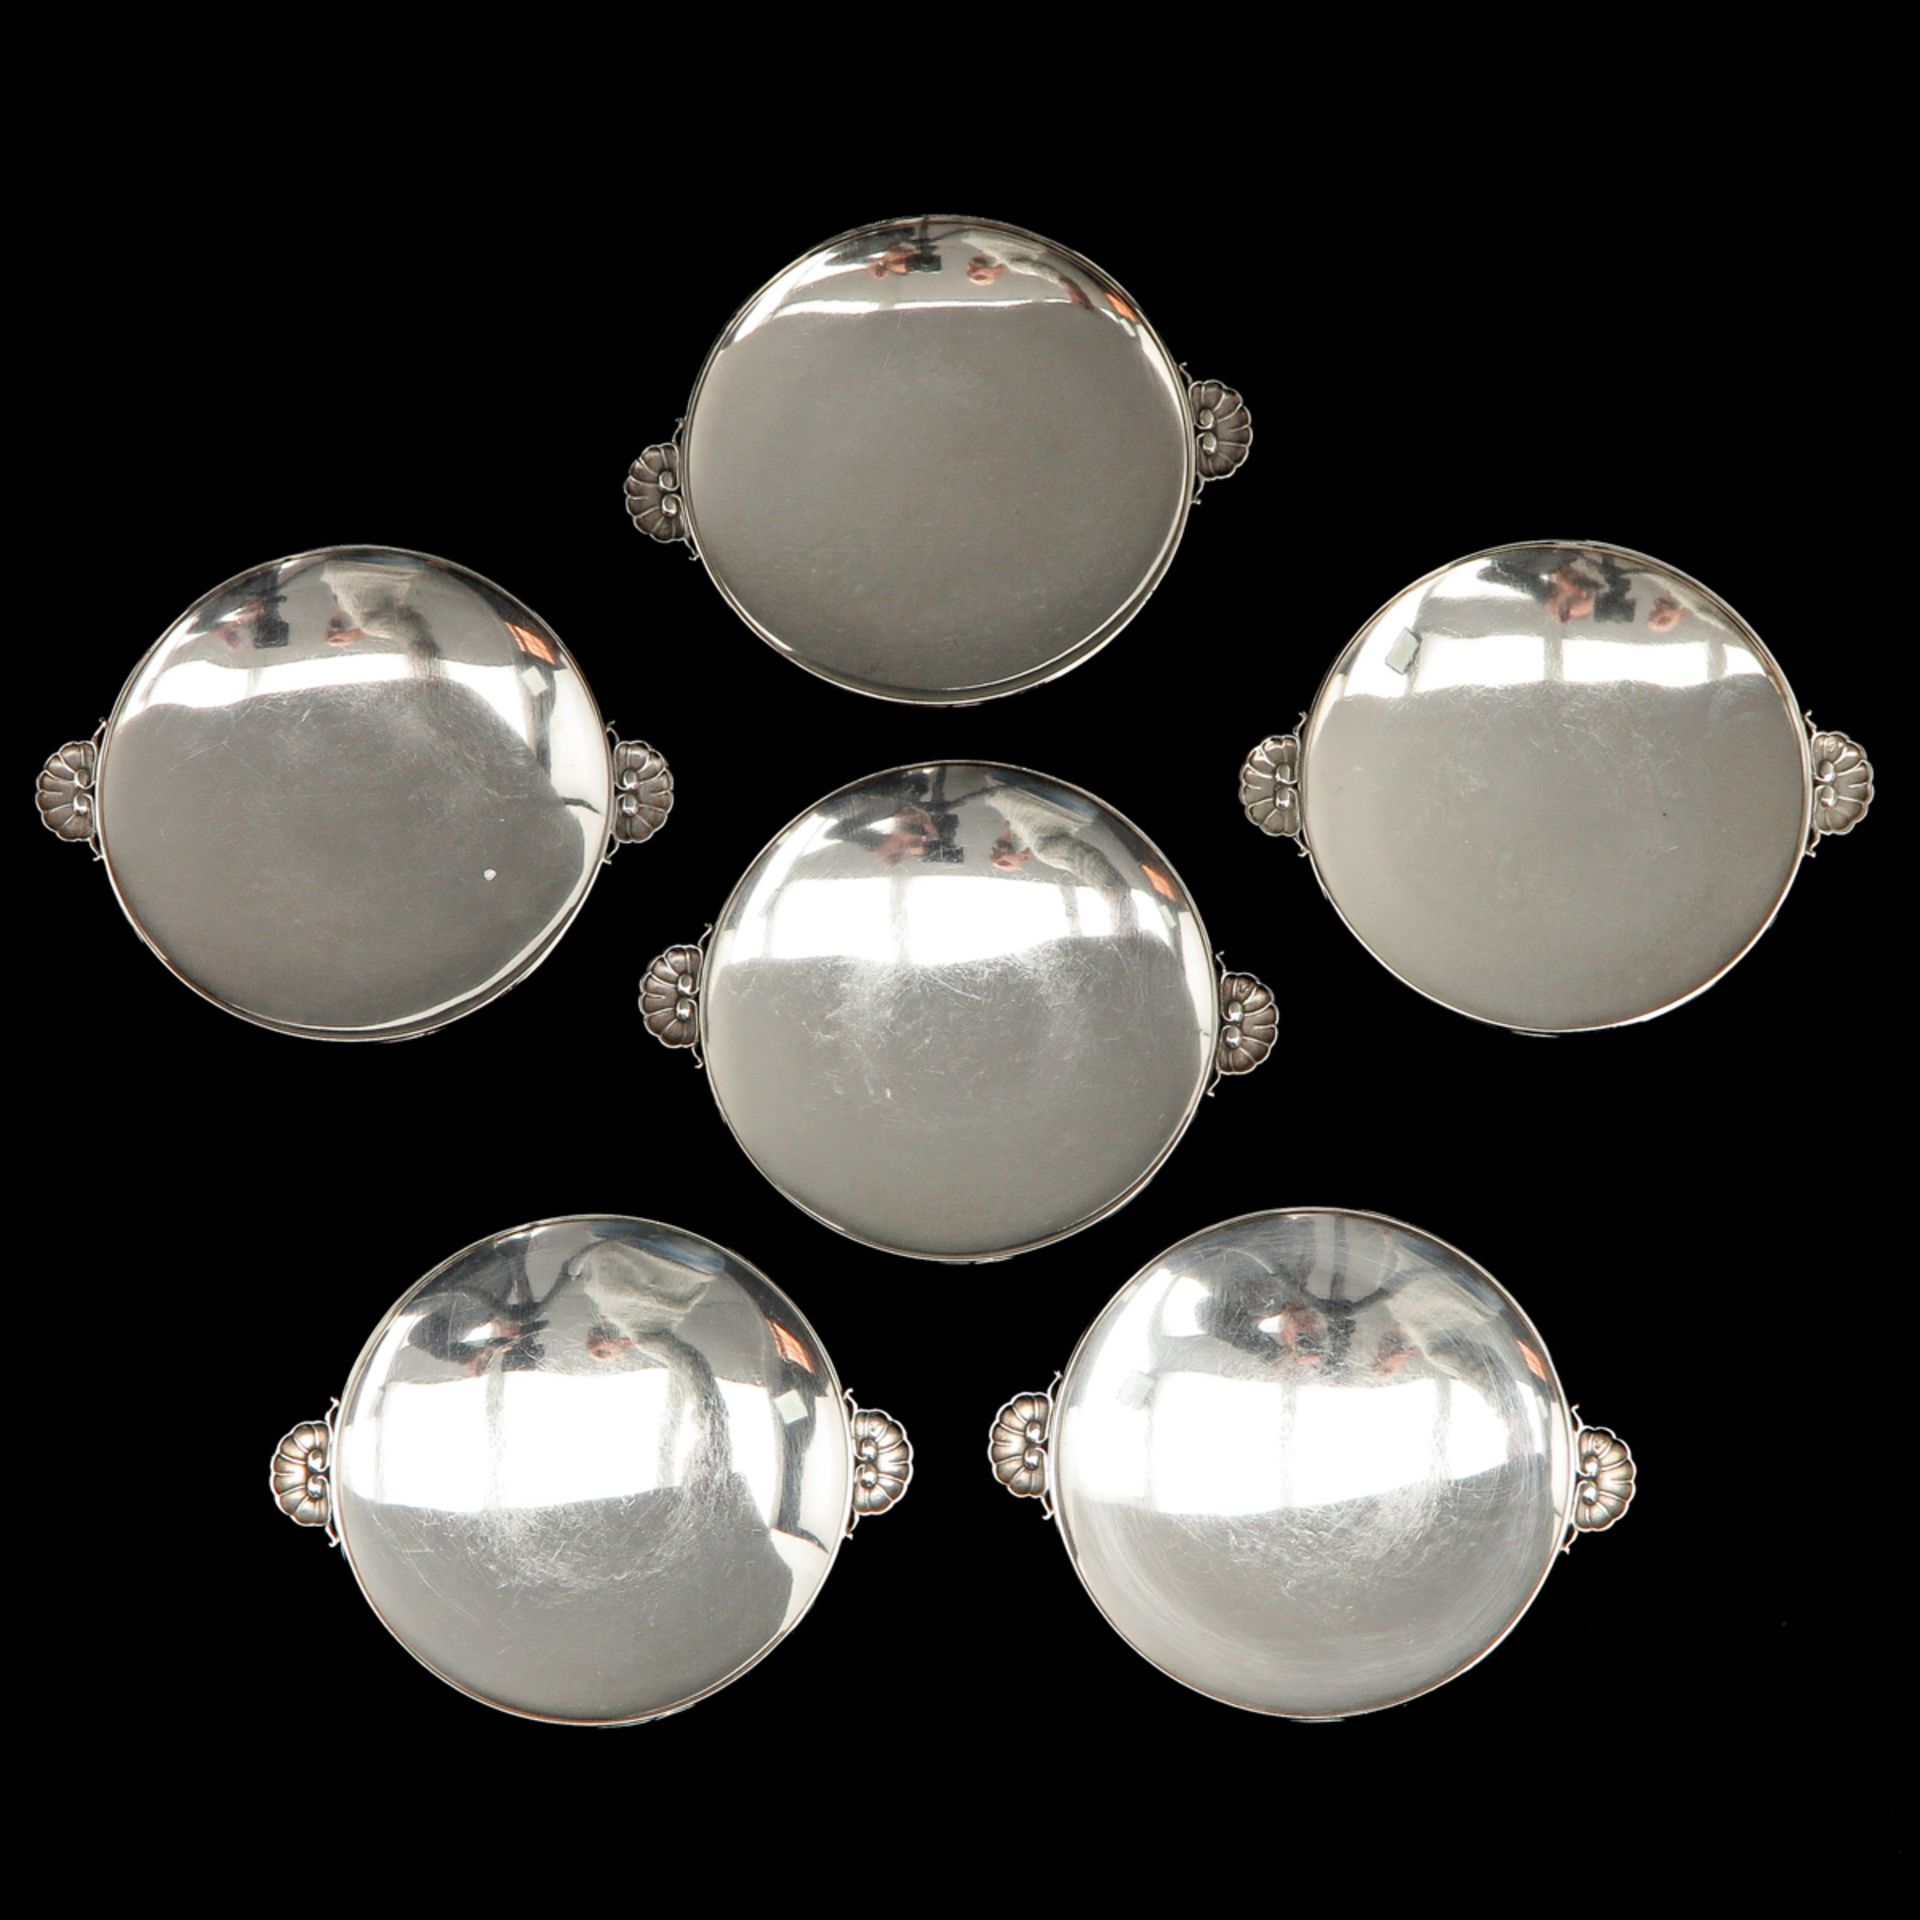 A Series of 6 Silver Georg Jensen Plates